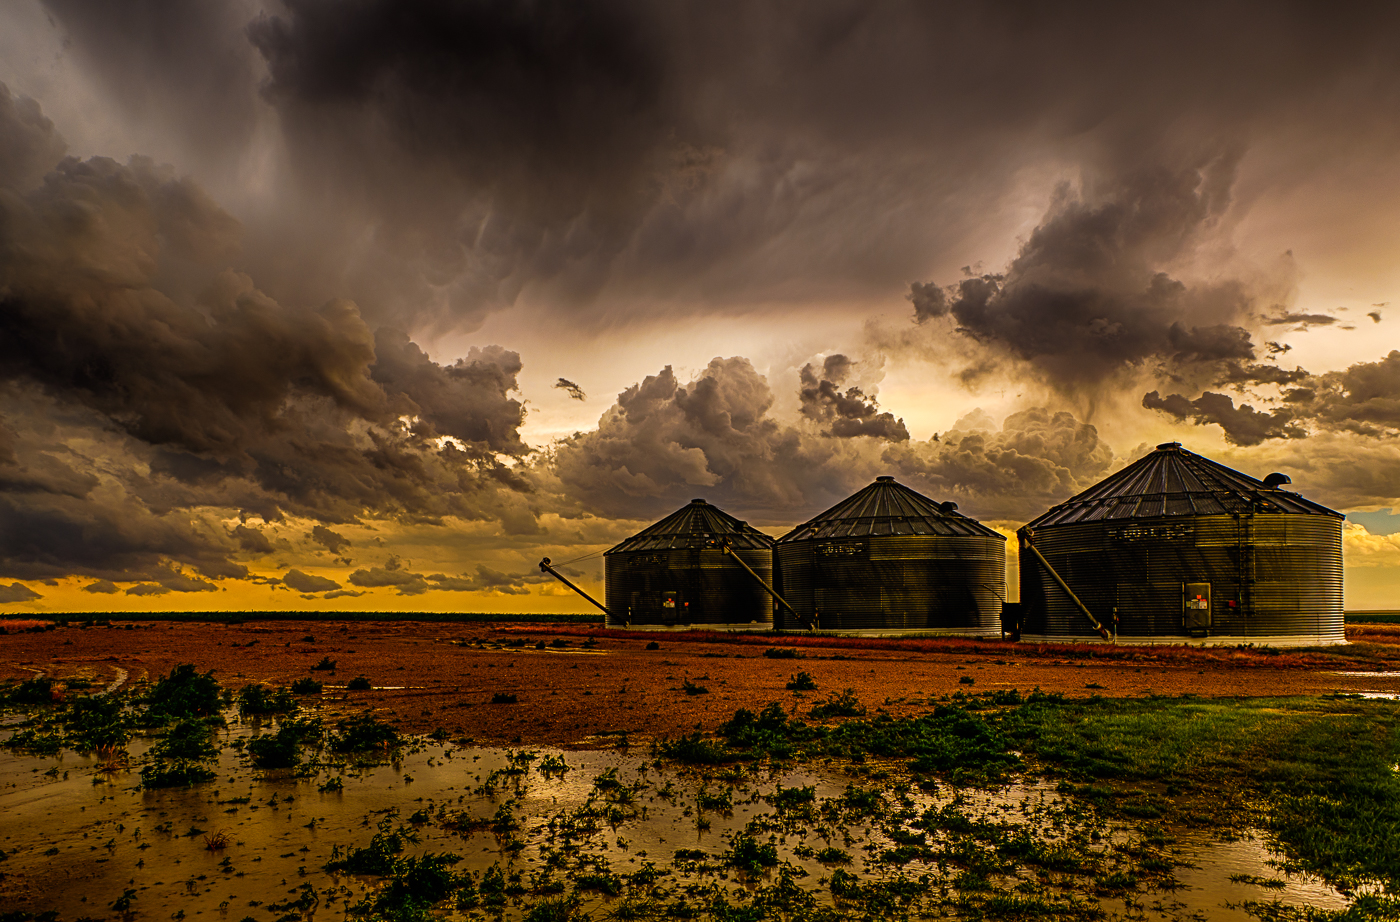 Grain Bins After the Storm